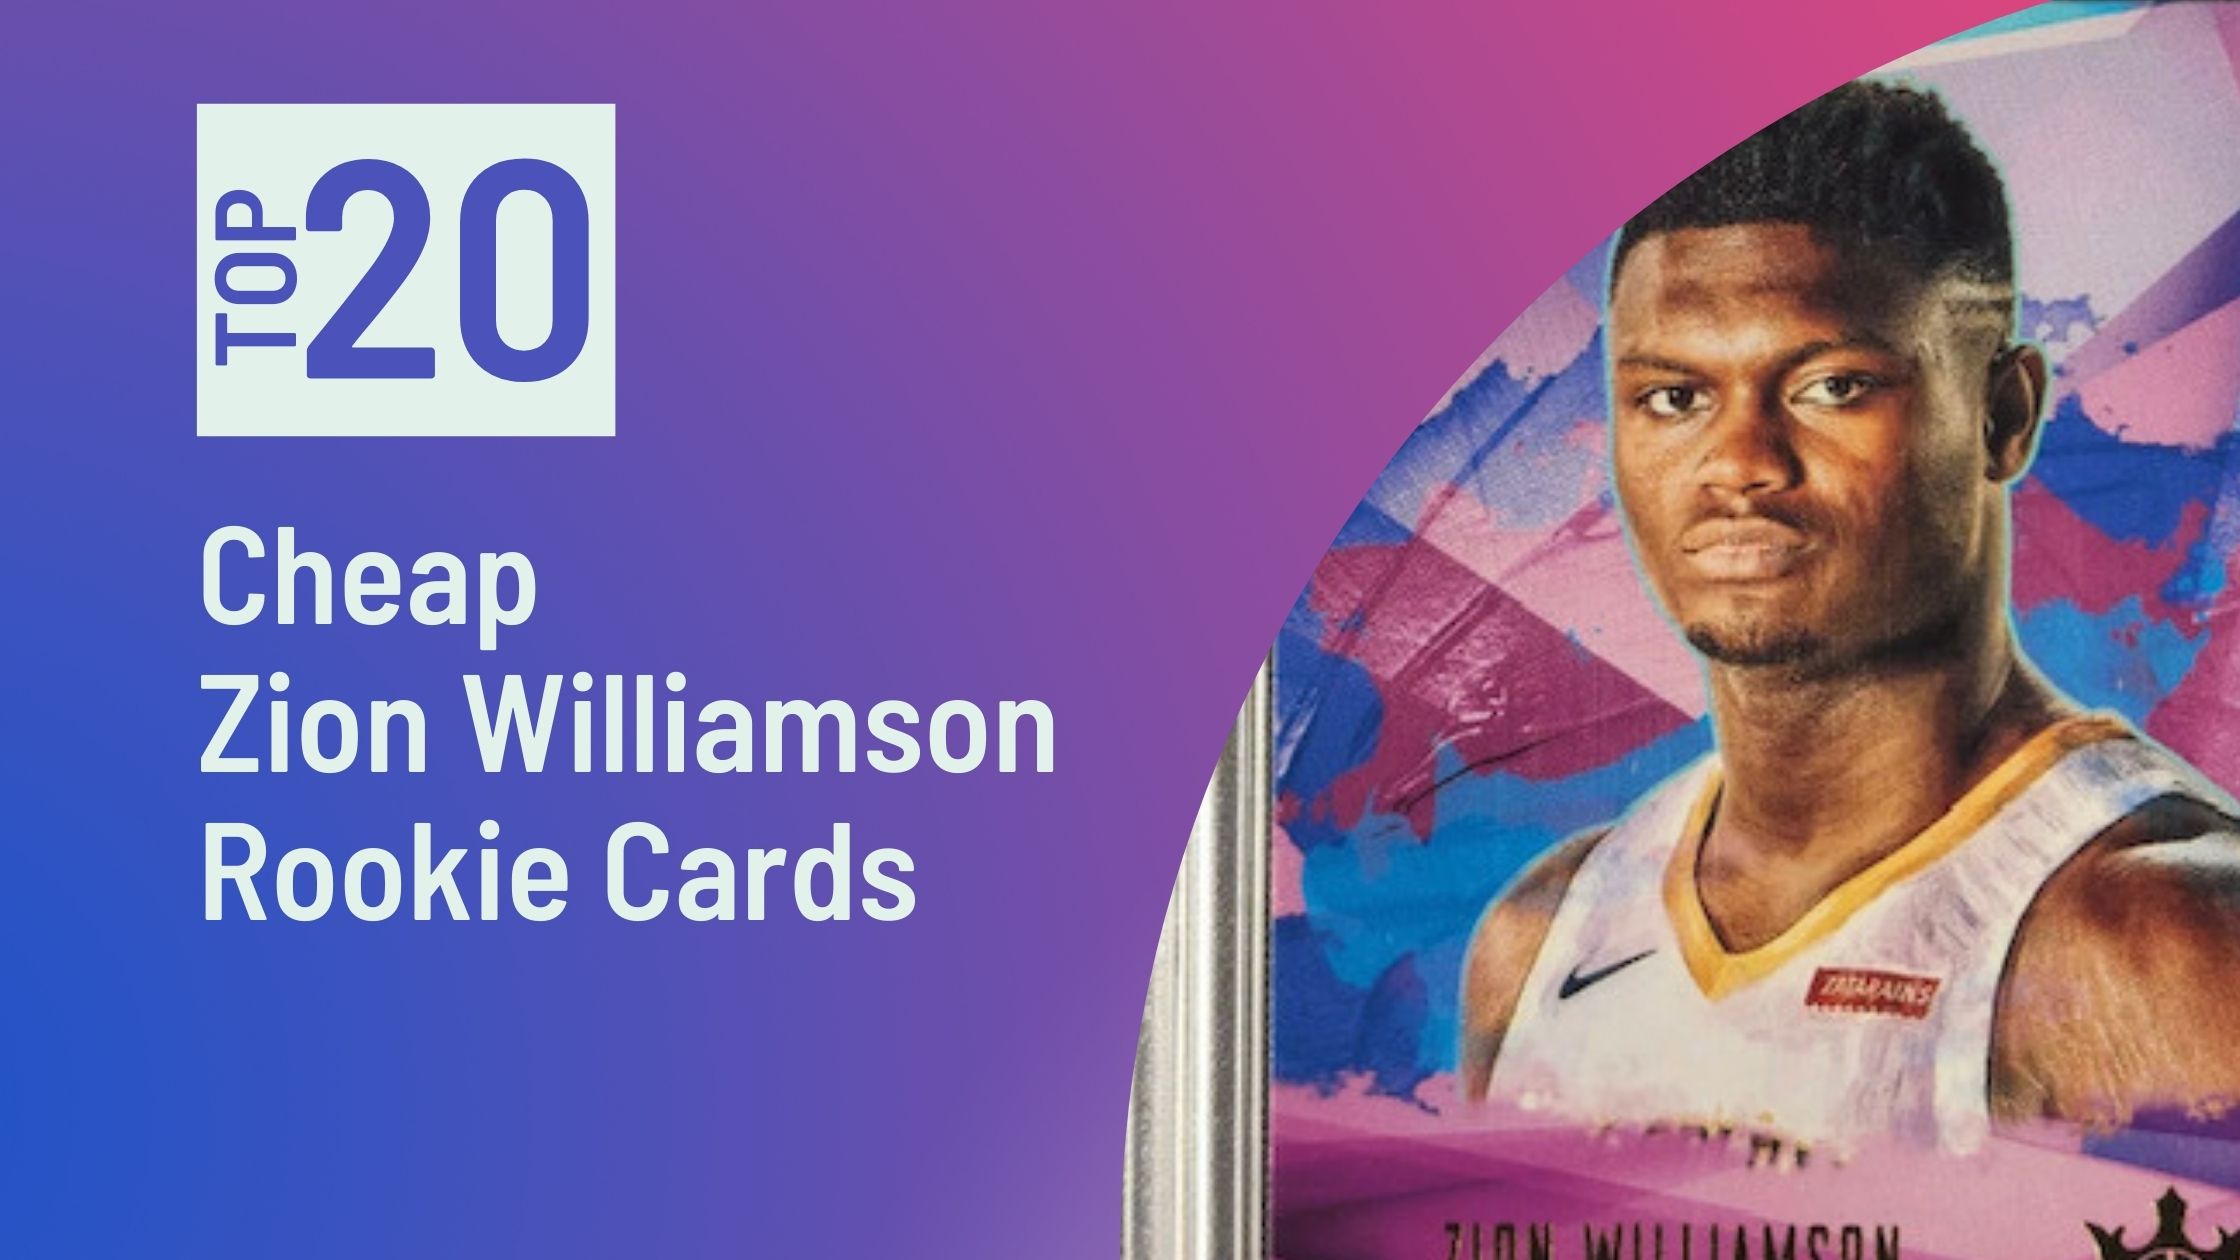 Featured image for the Cheap Zion Williamson Rookie Cards blog post on Sports Card Sharks